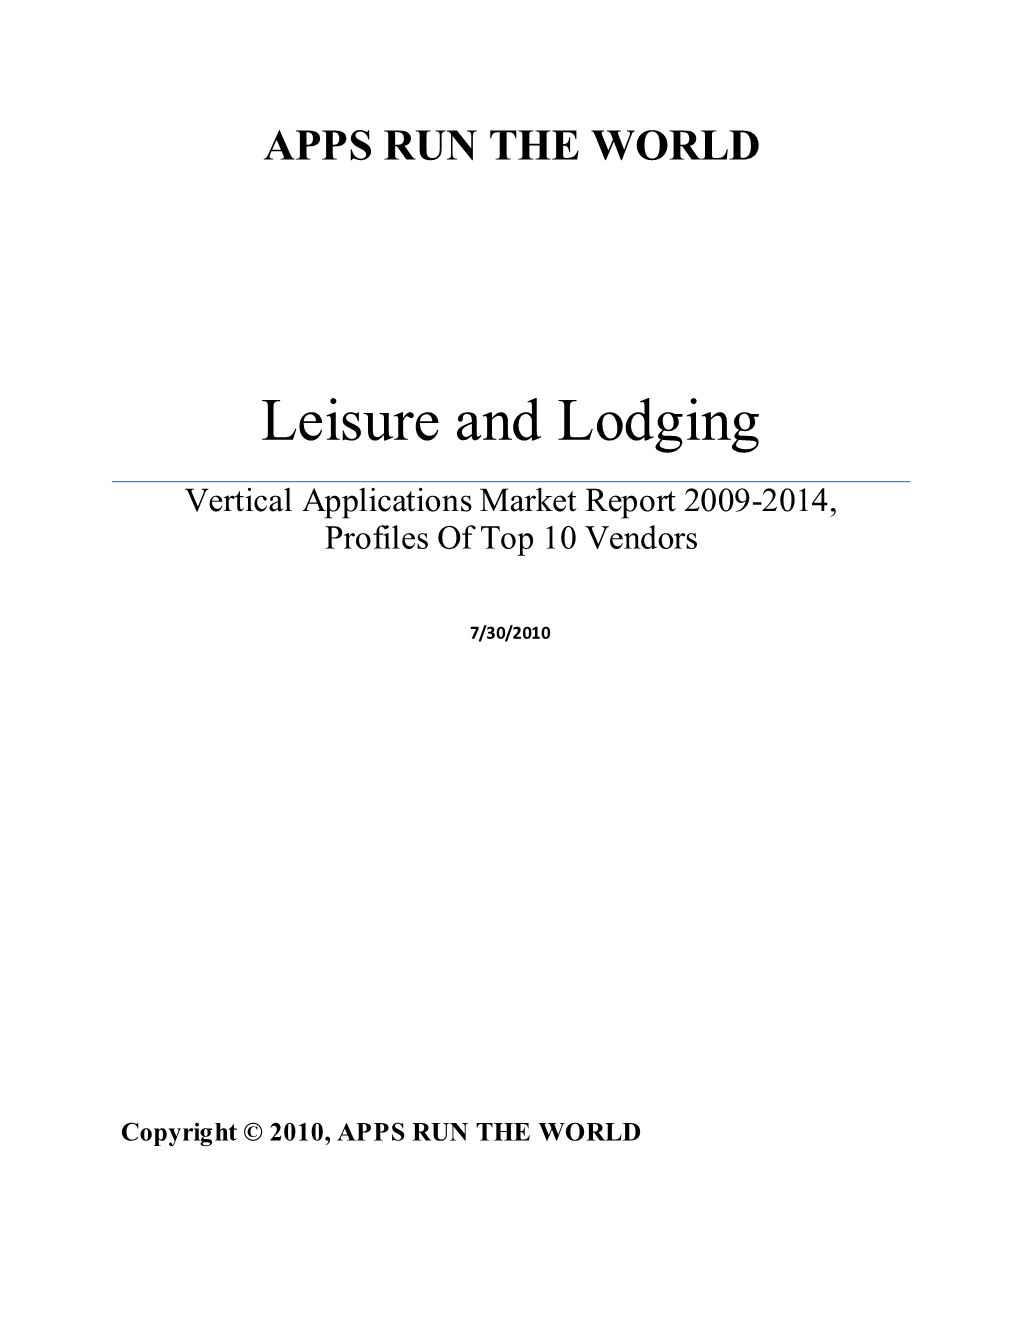 Leisure and Lodging Vertical Applications Market Report 2009-2014, Profiles of Top 10 Vendors